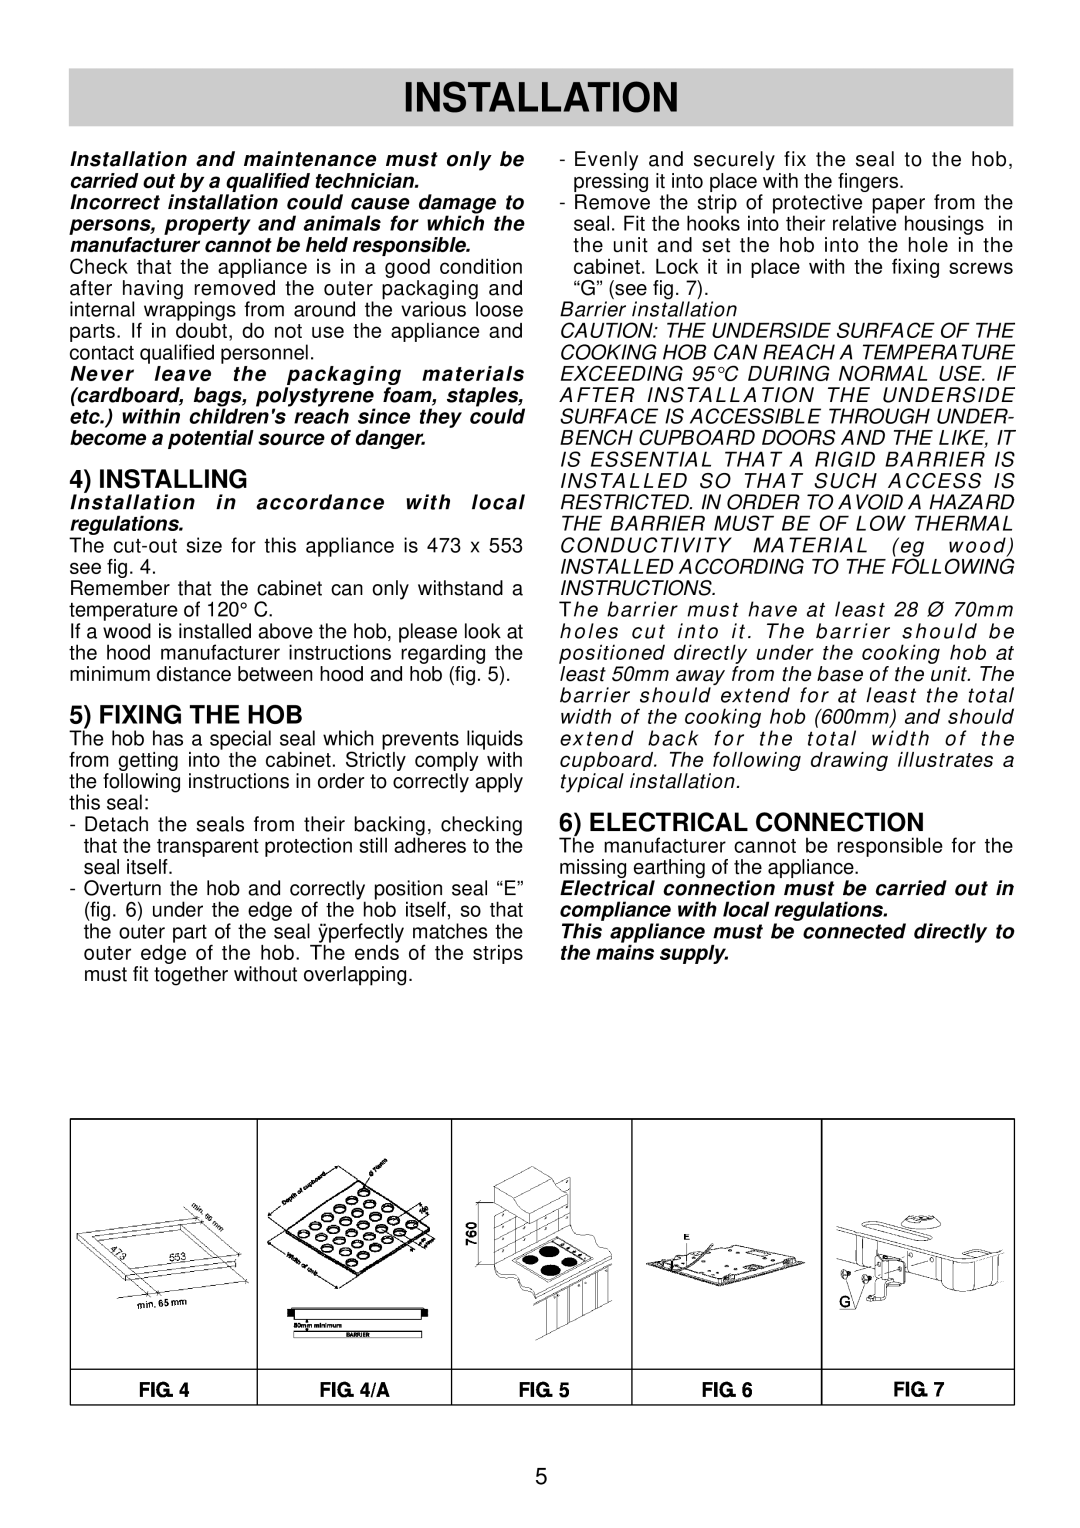 Smeg SA435X-1 instruction manual Installation, Installing, Fixing The Hob, Electrical Connection 